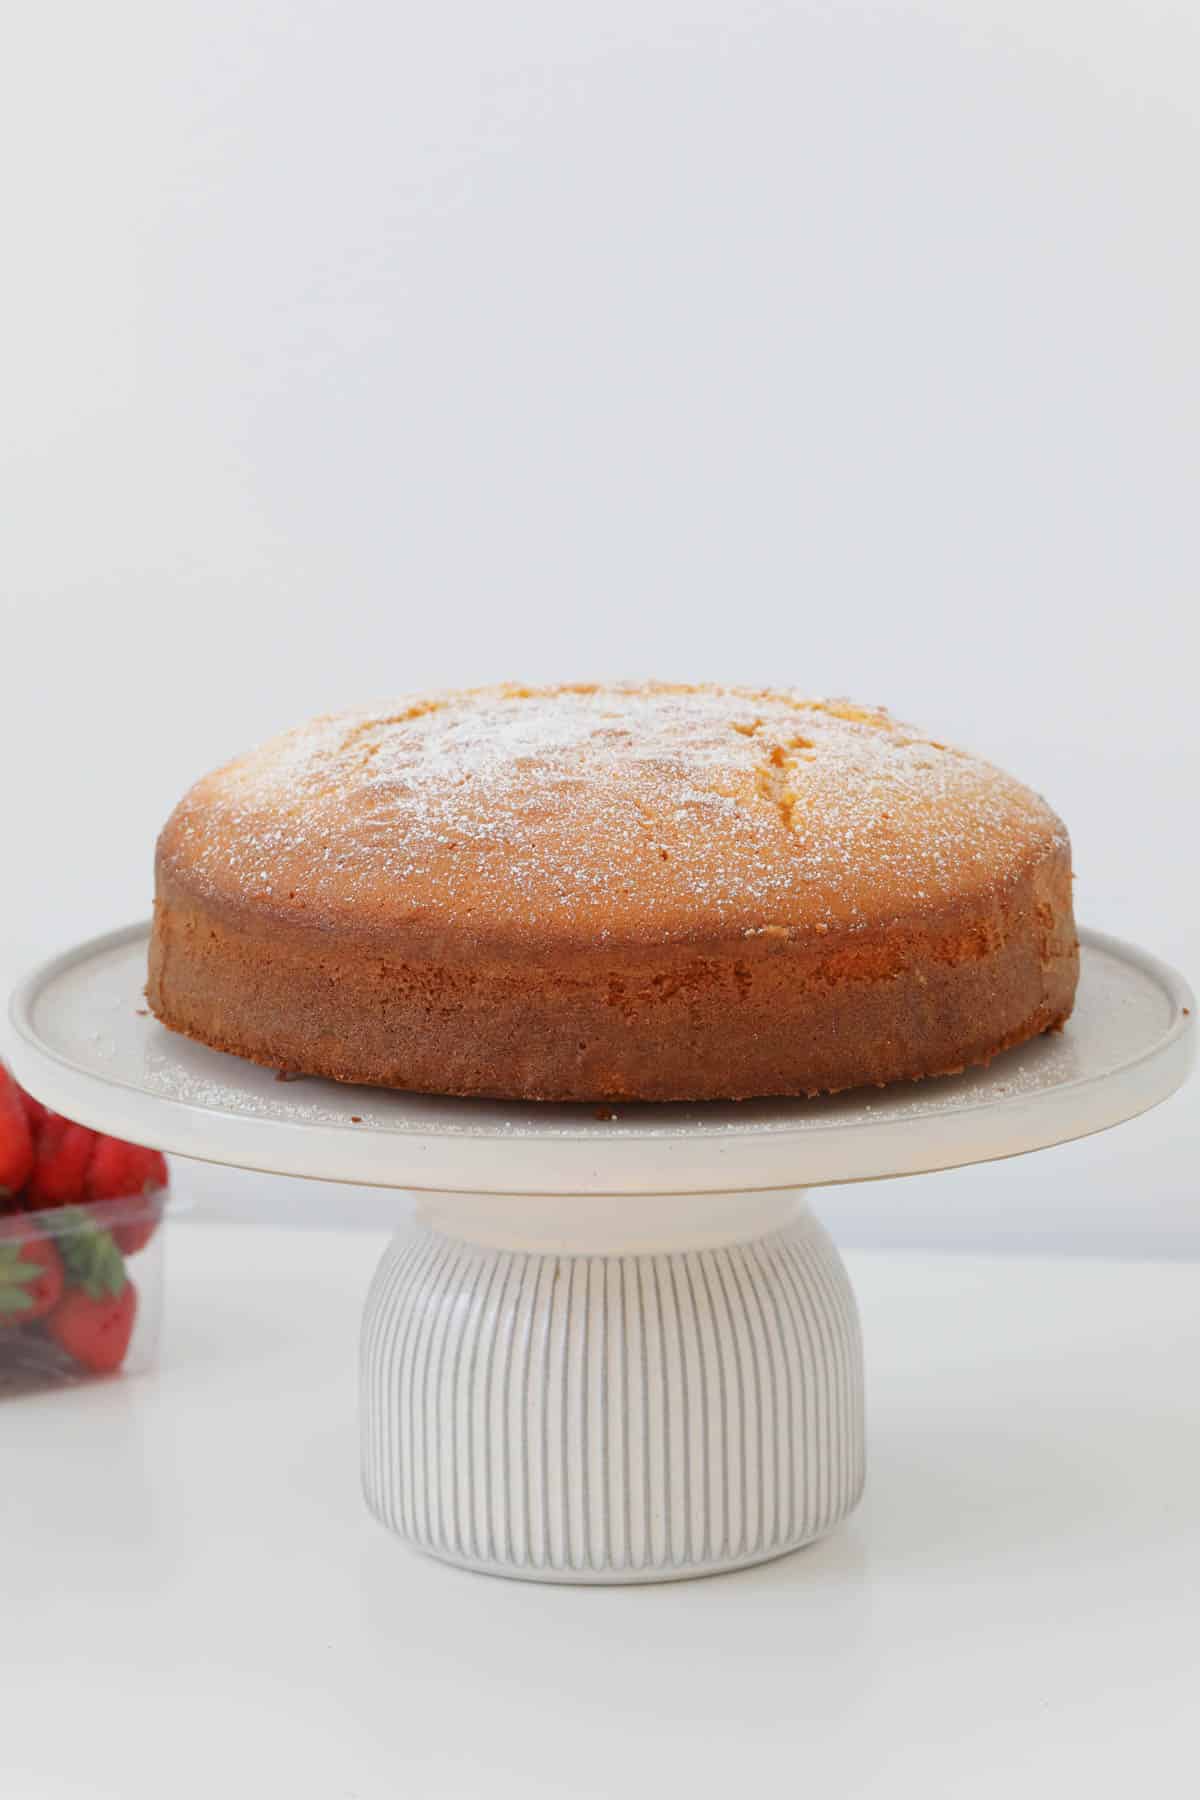 A butter cake dusted with icing sugar, served on a white cake stand.